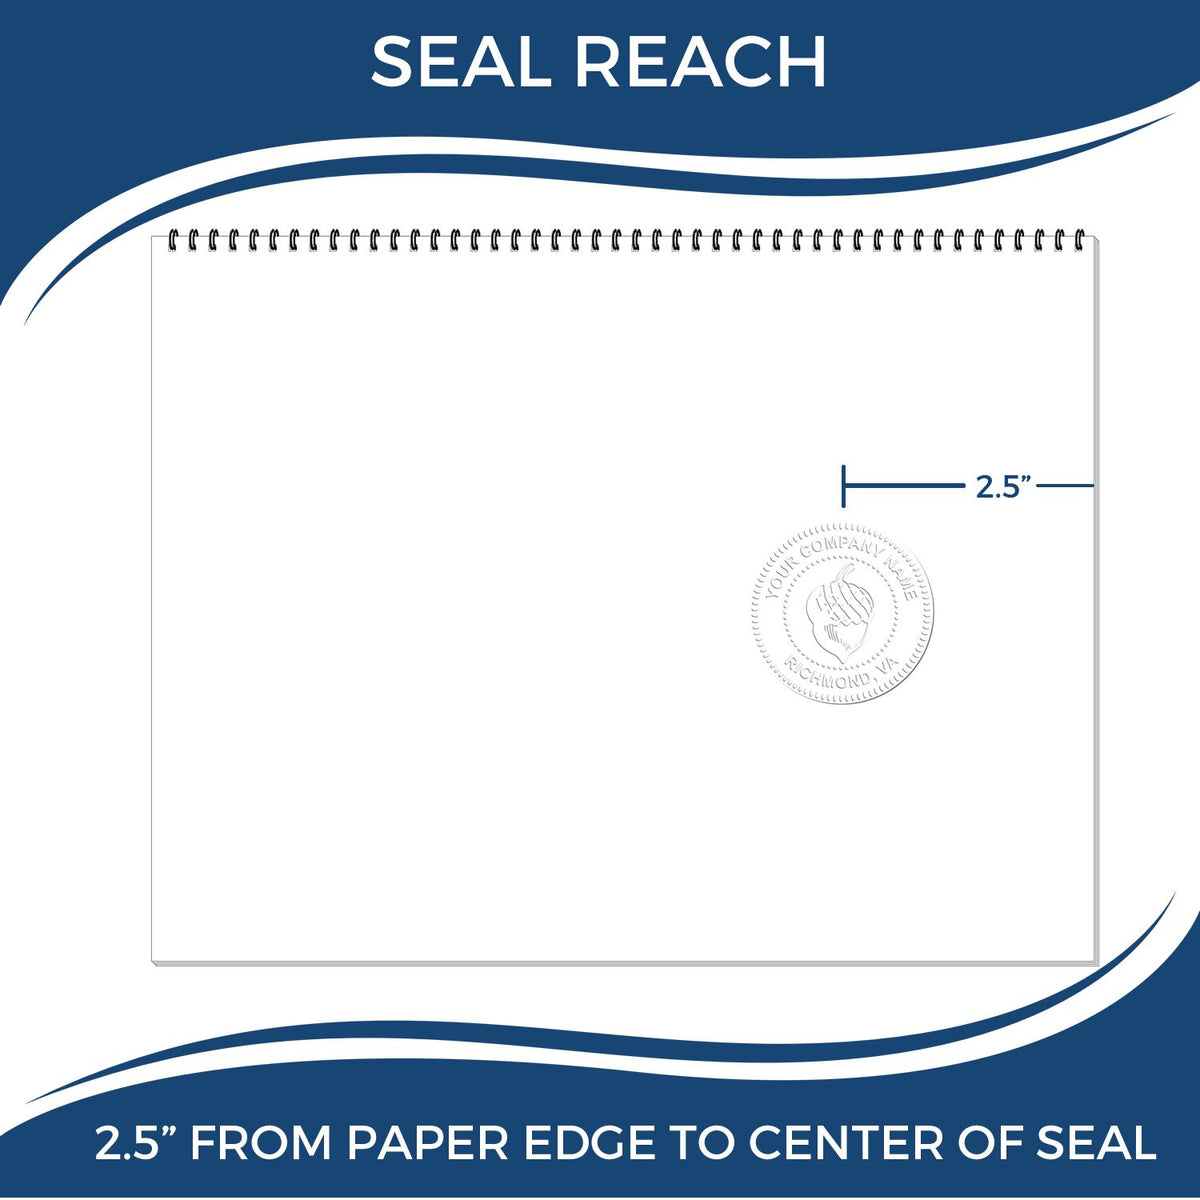 An infographic showing the seal reach which is represented by a ruler and a miniature seal image of the Heavy Duty Cast Iron Arizona Architect Embosser